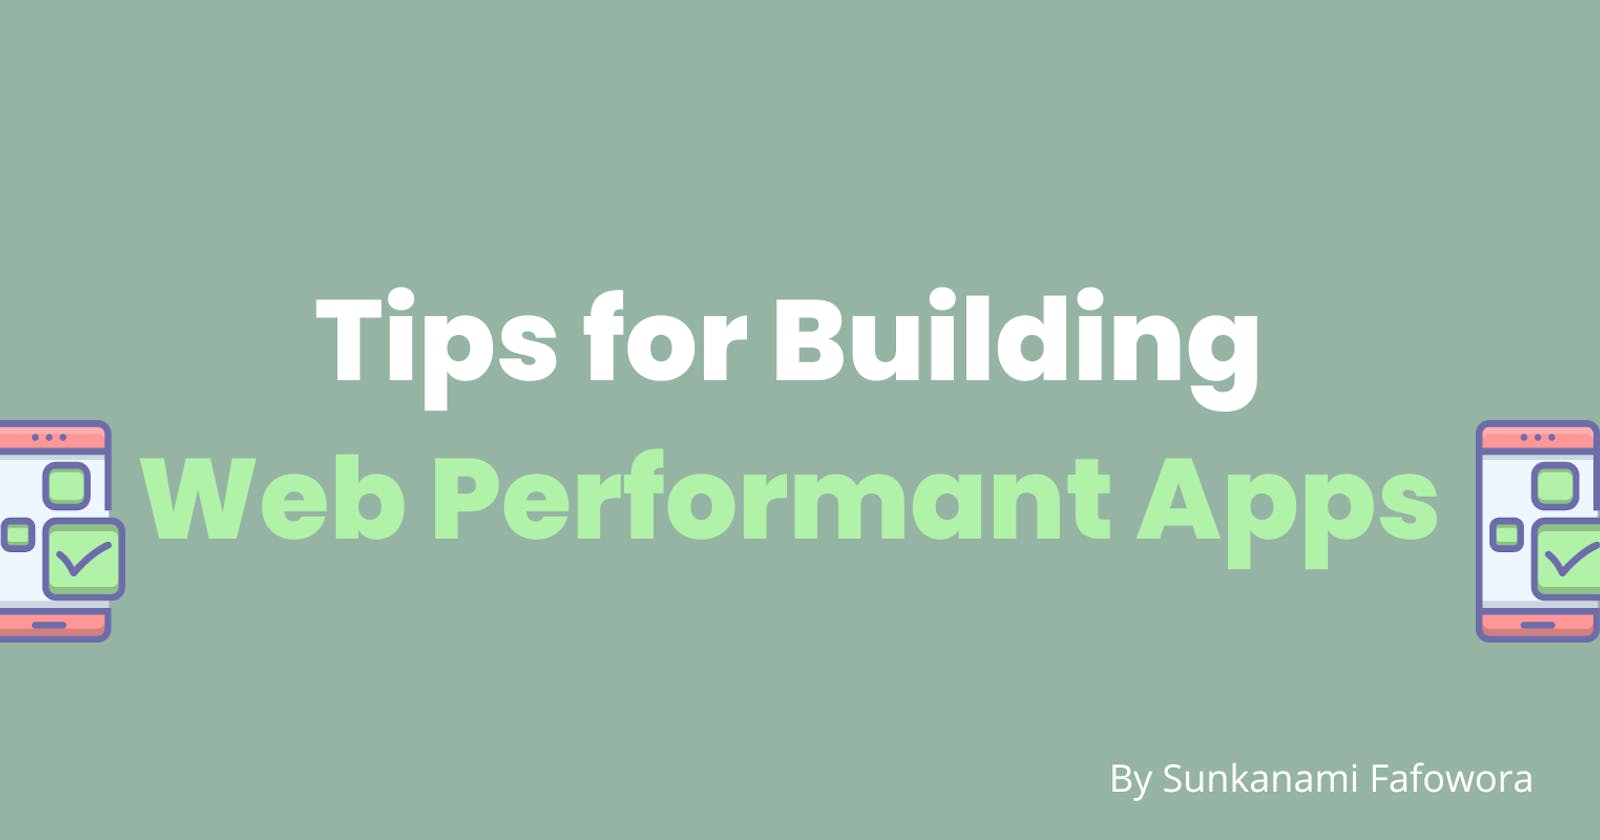 Tips for Building Web Performant Apps